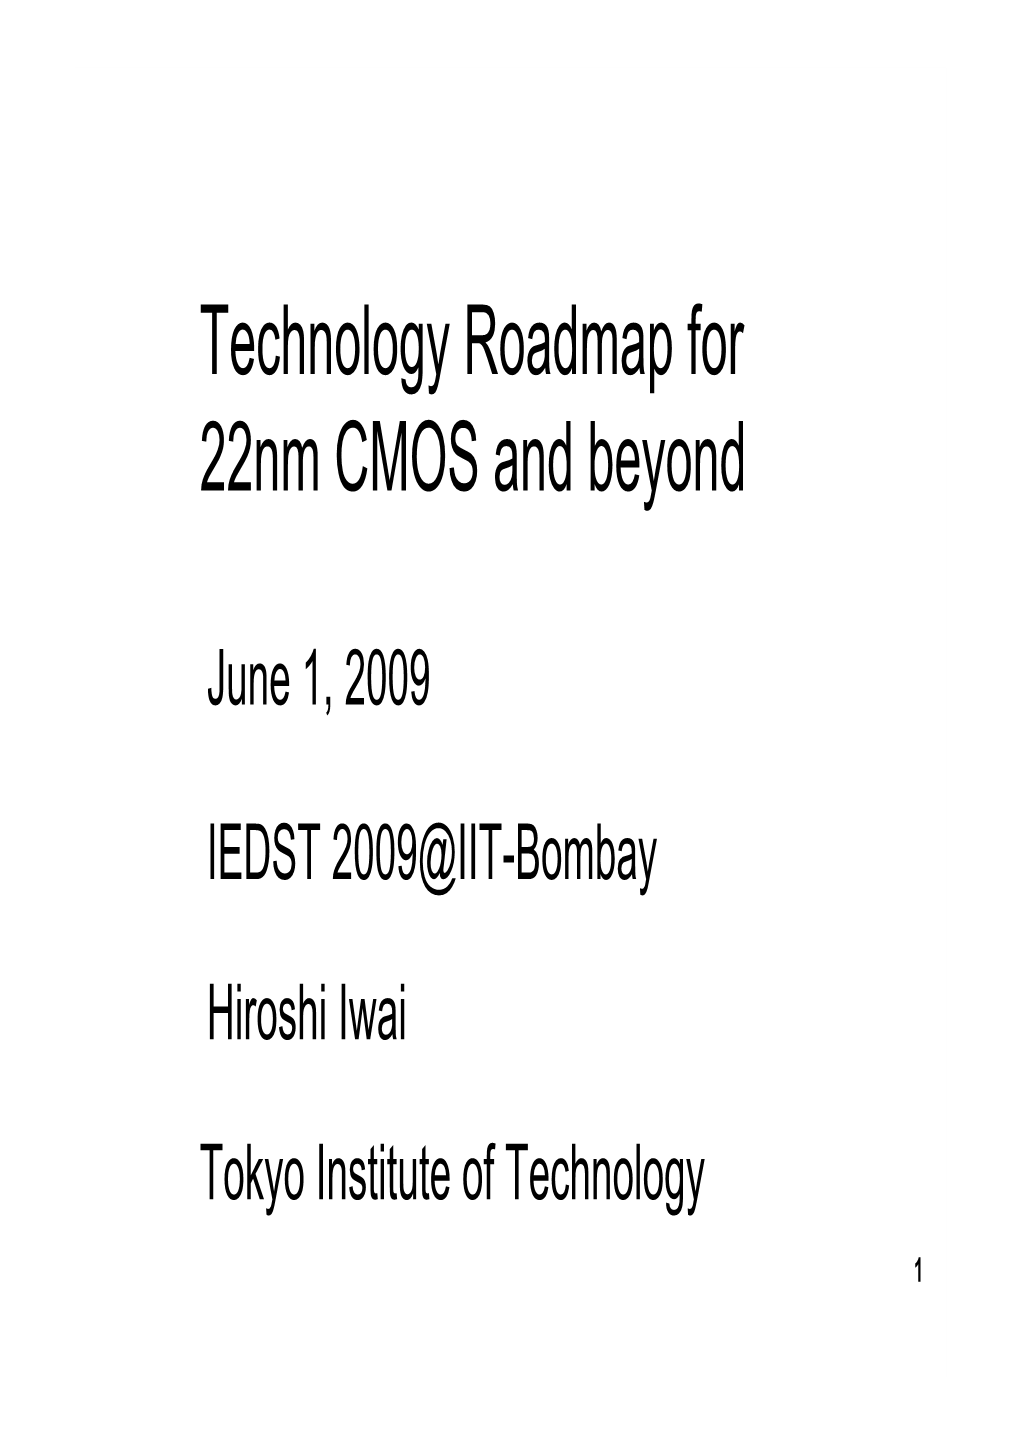 Technology Roadmap for 22Nm CMOS and Beyond